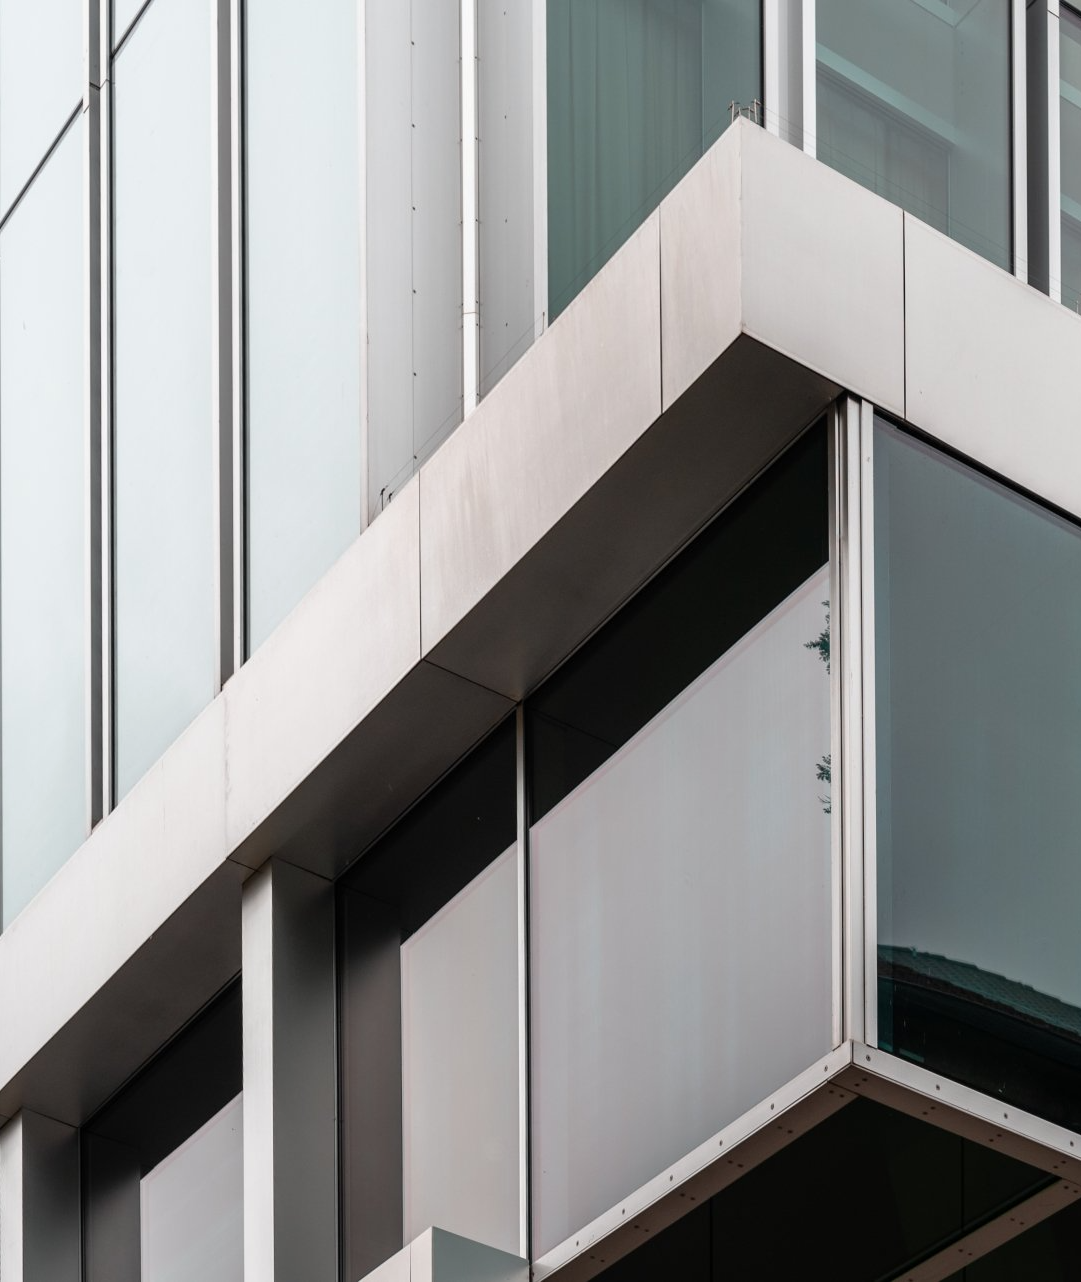 glass facade on a modern aluminum window frame at a commercial building